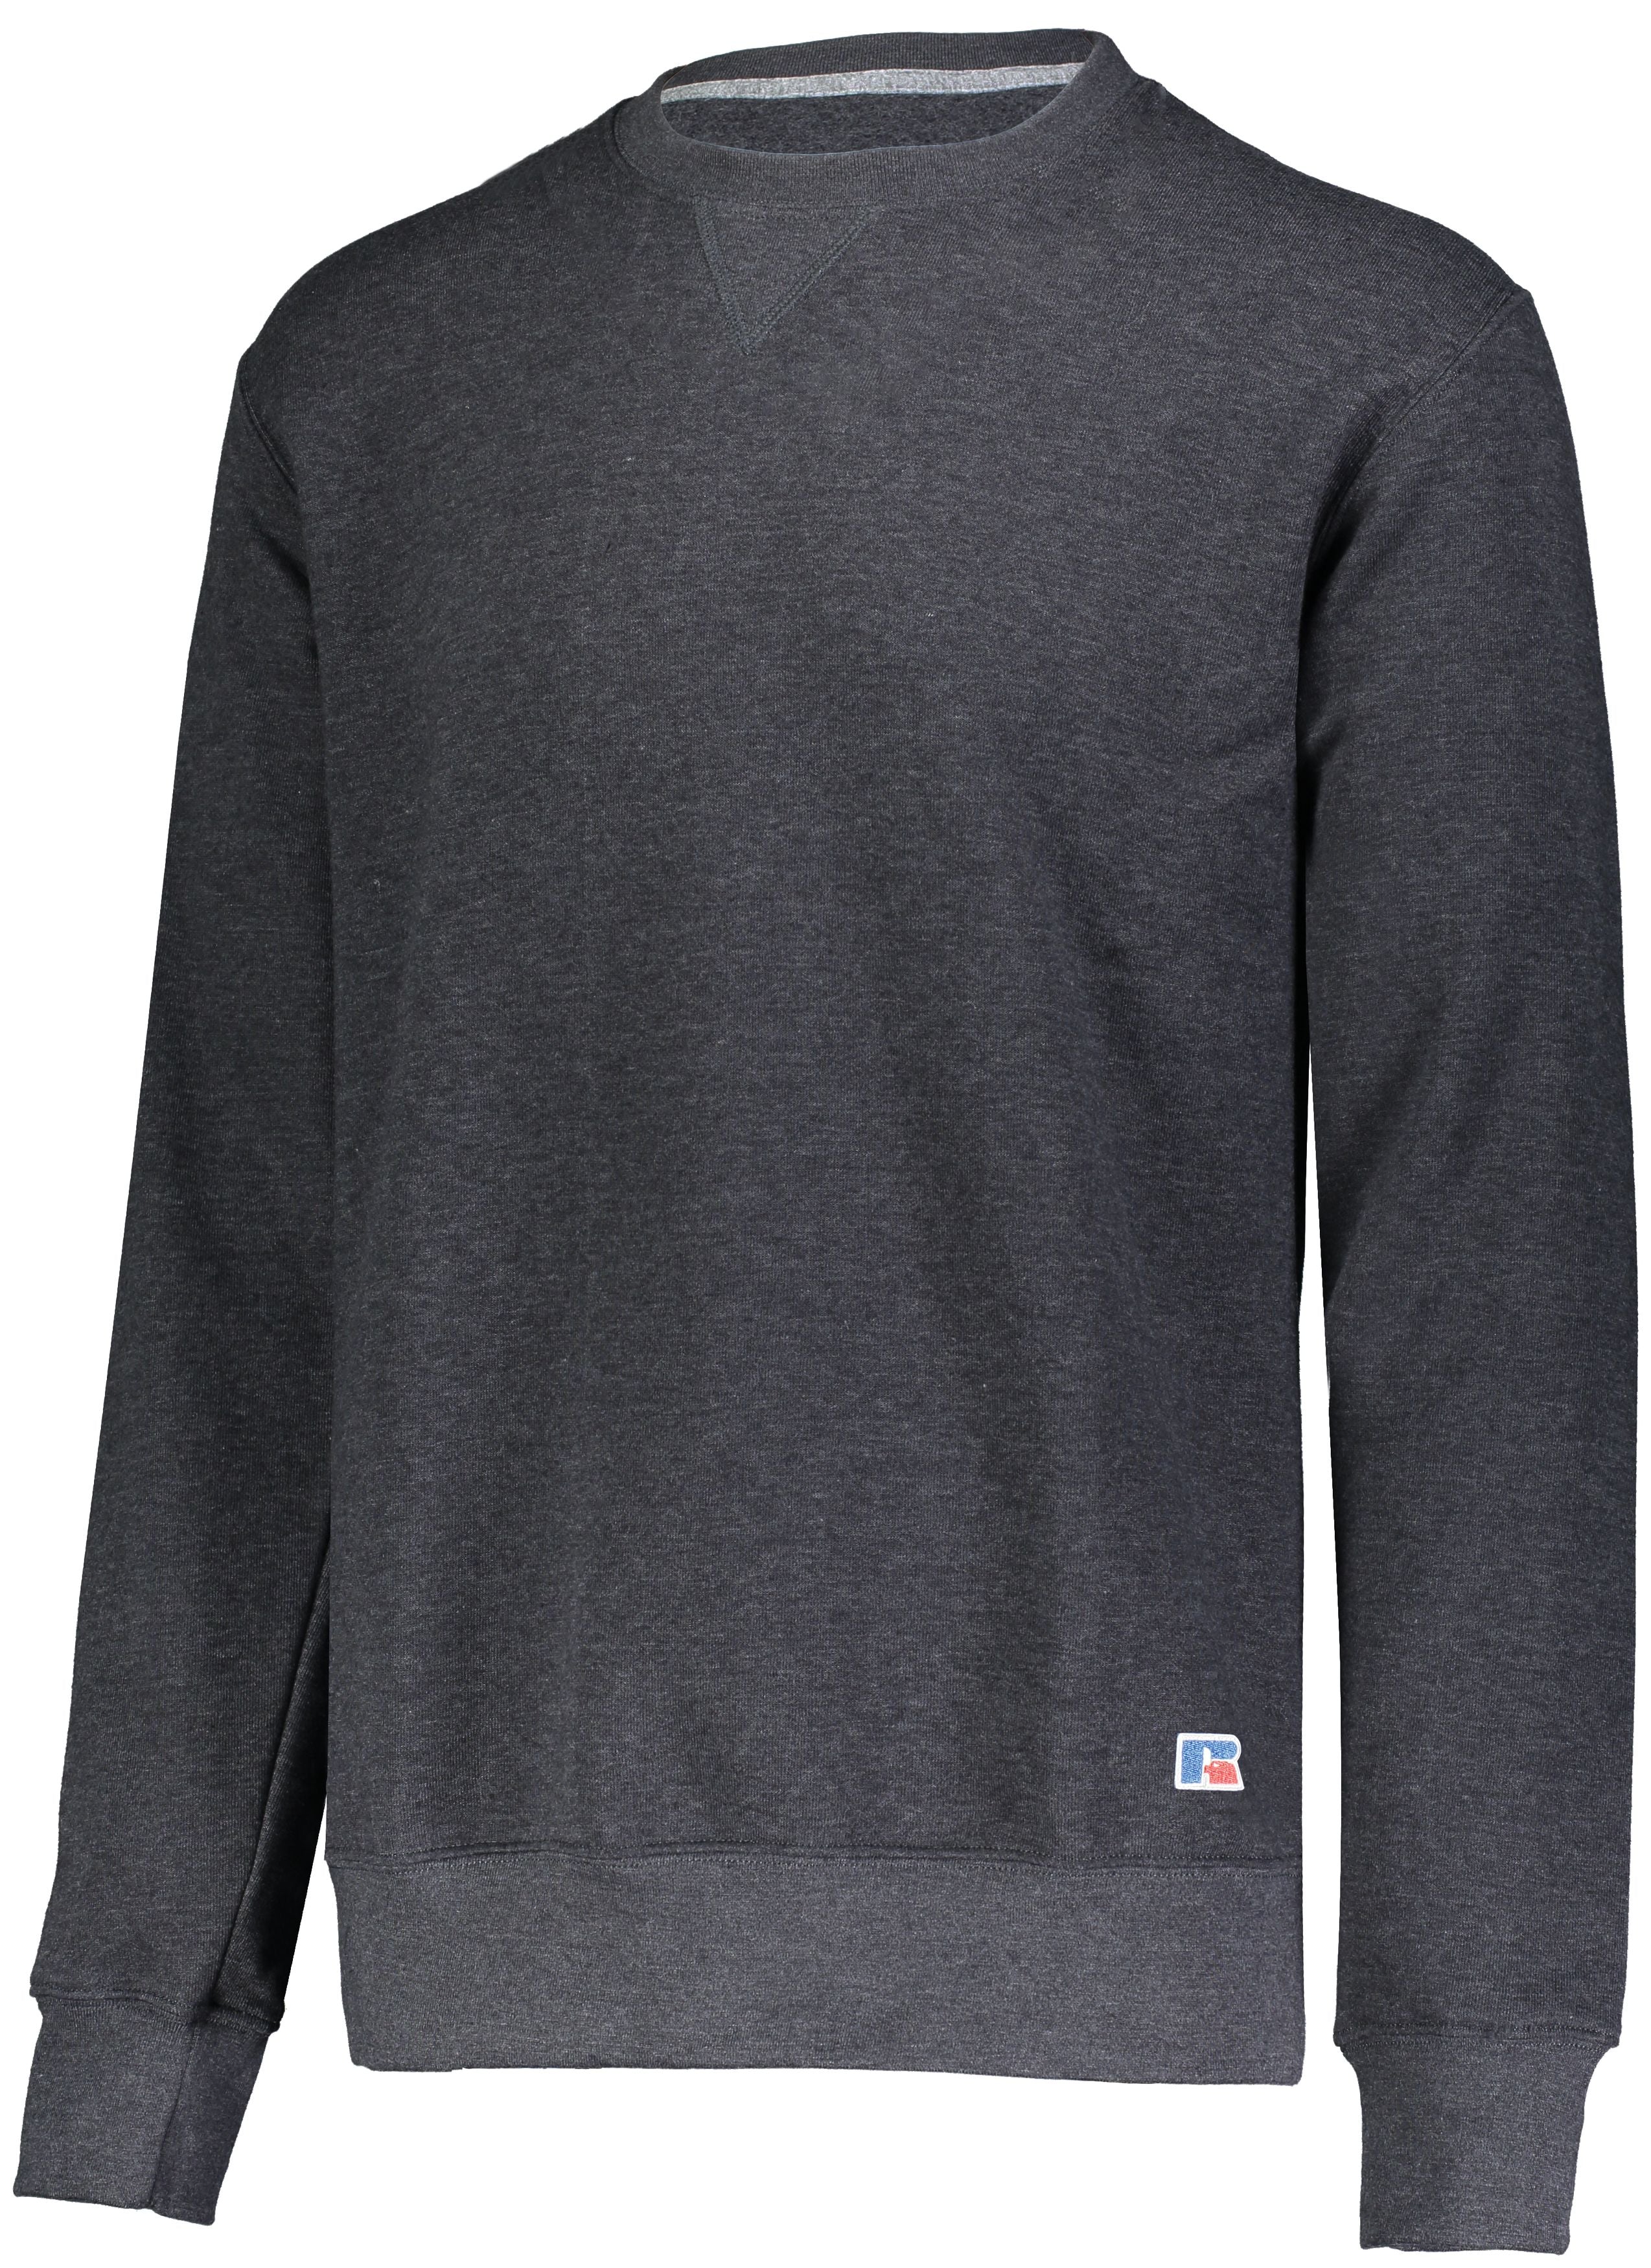 Russell Athletic 80/20 Fleece Crew in Charcoal Grey Heather  -Part of the Adult, Russell-Athletic-Products product lines at KanaleyCreations.com